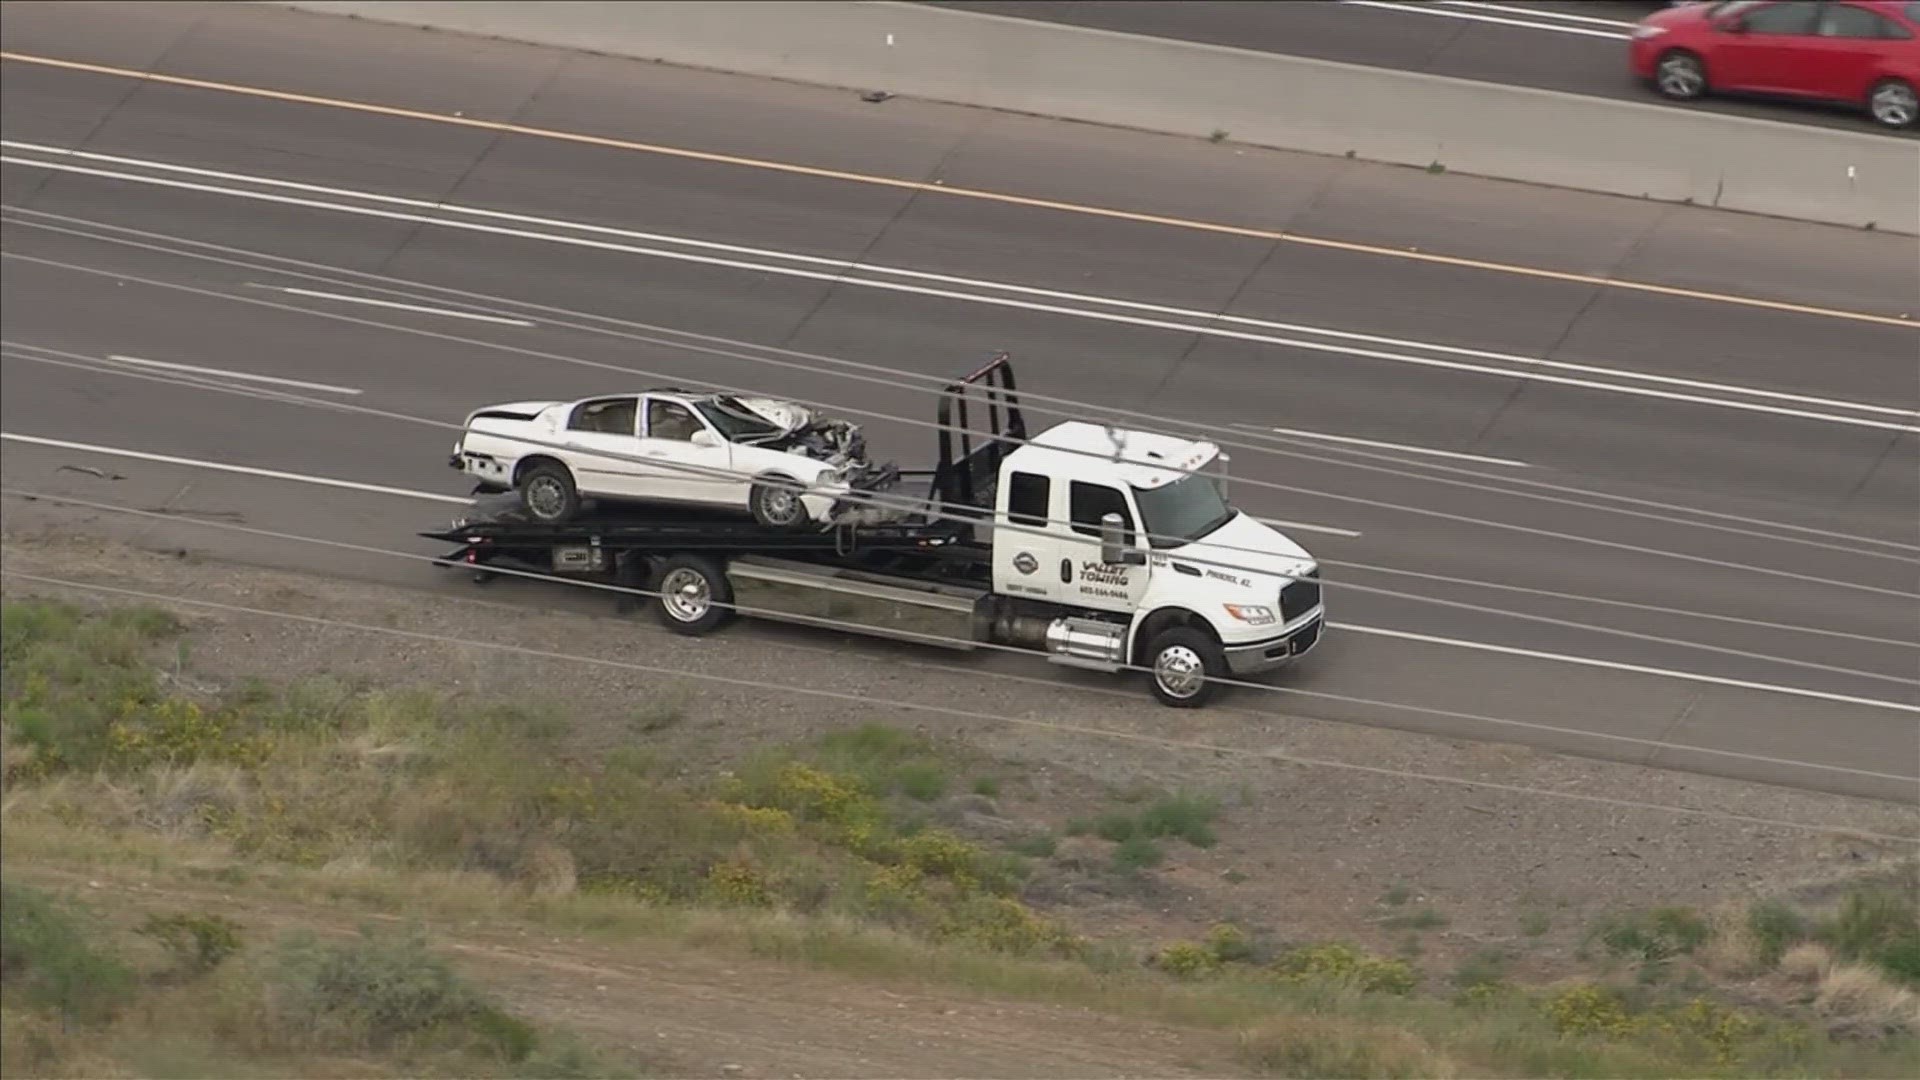 The Arizona Department of Public Safety says two people have life-threatening injuries and all of southbound I-17 near State Route 303 is open.